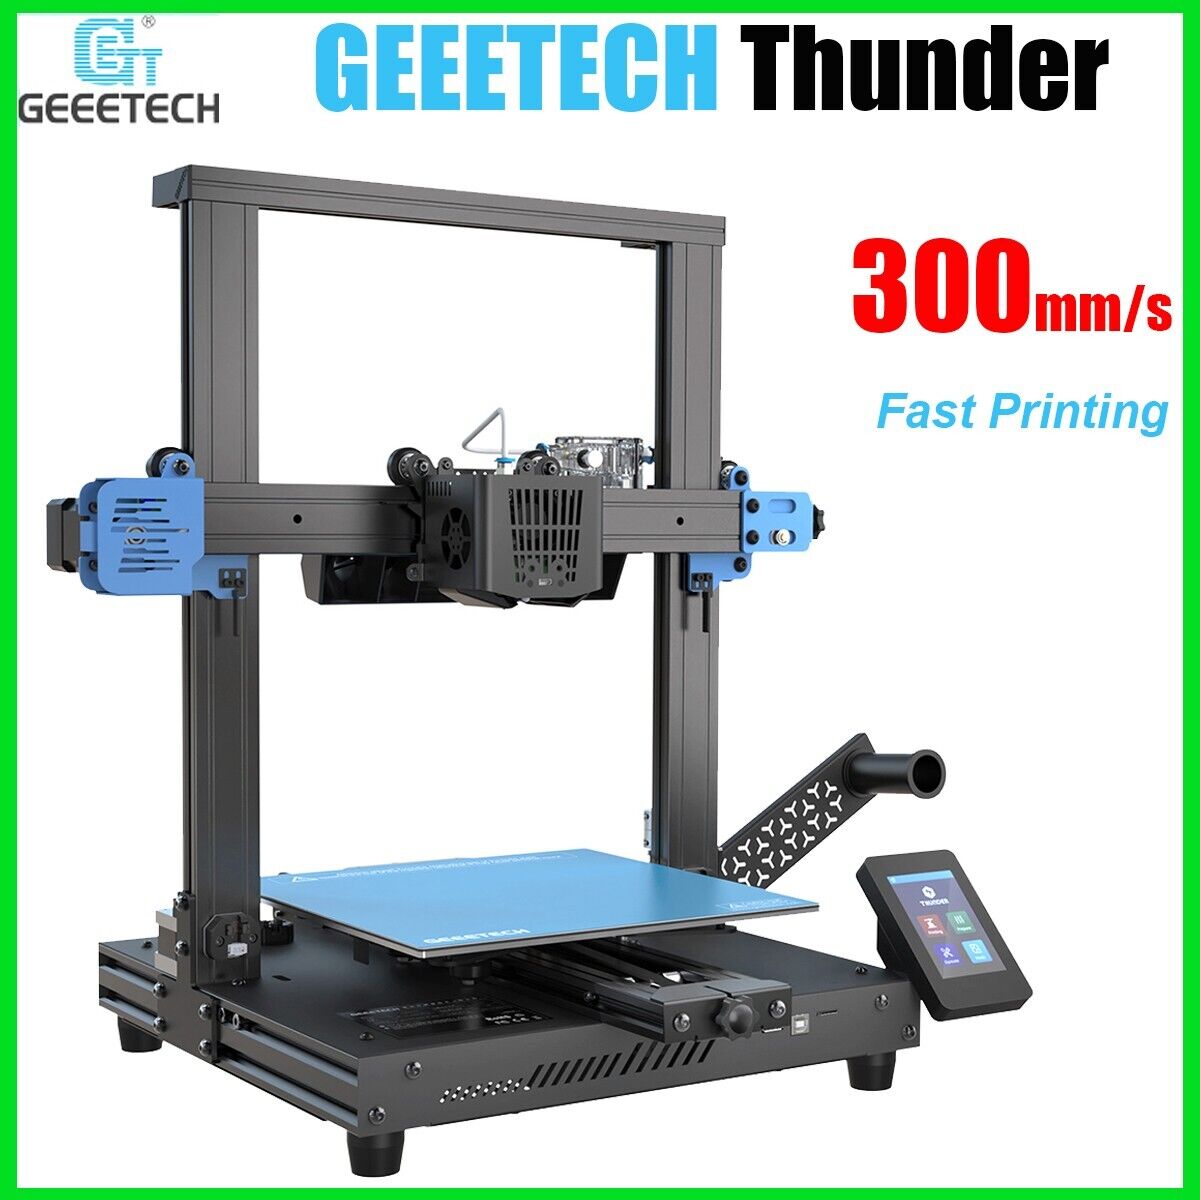 Geeetech 3D Printer Thunder 300mm/s Fast Printing w/ Auto-Leveling 250*250*260mm